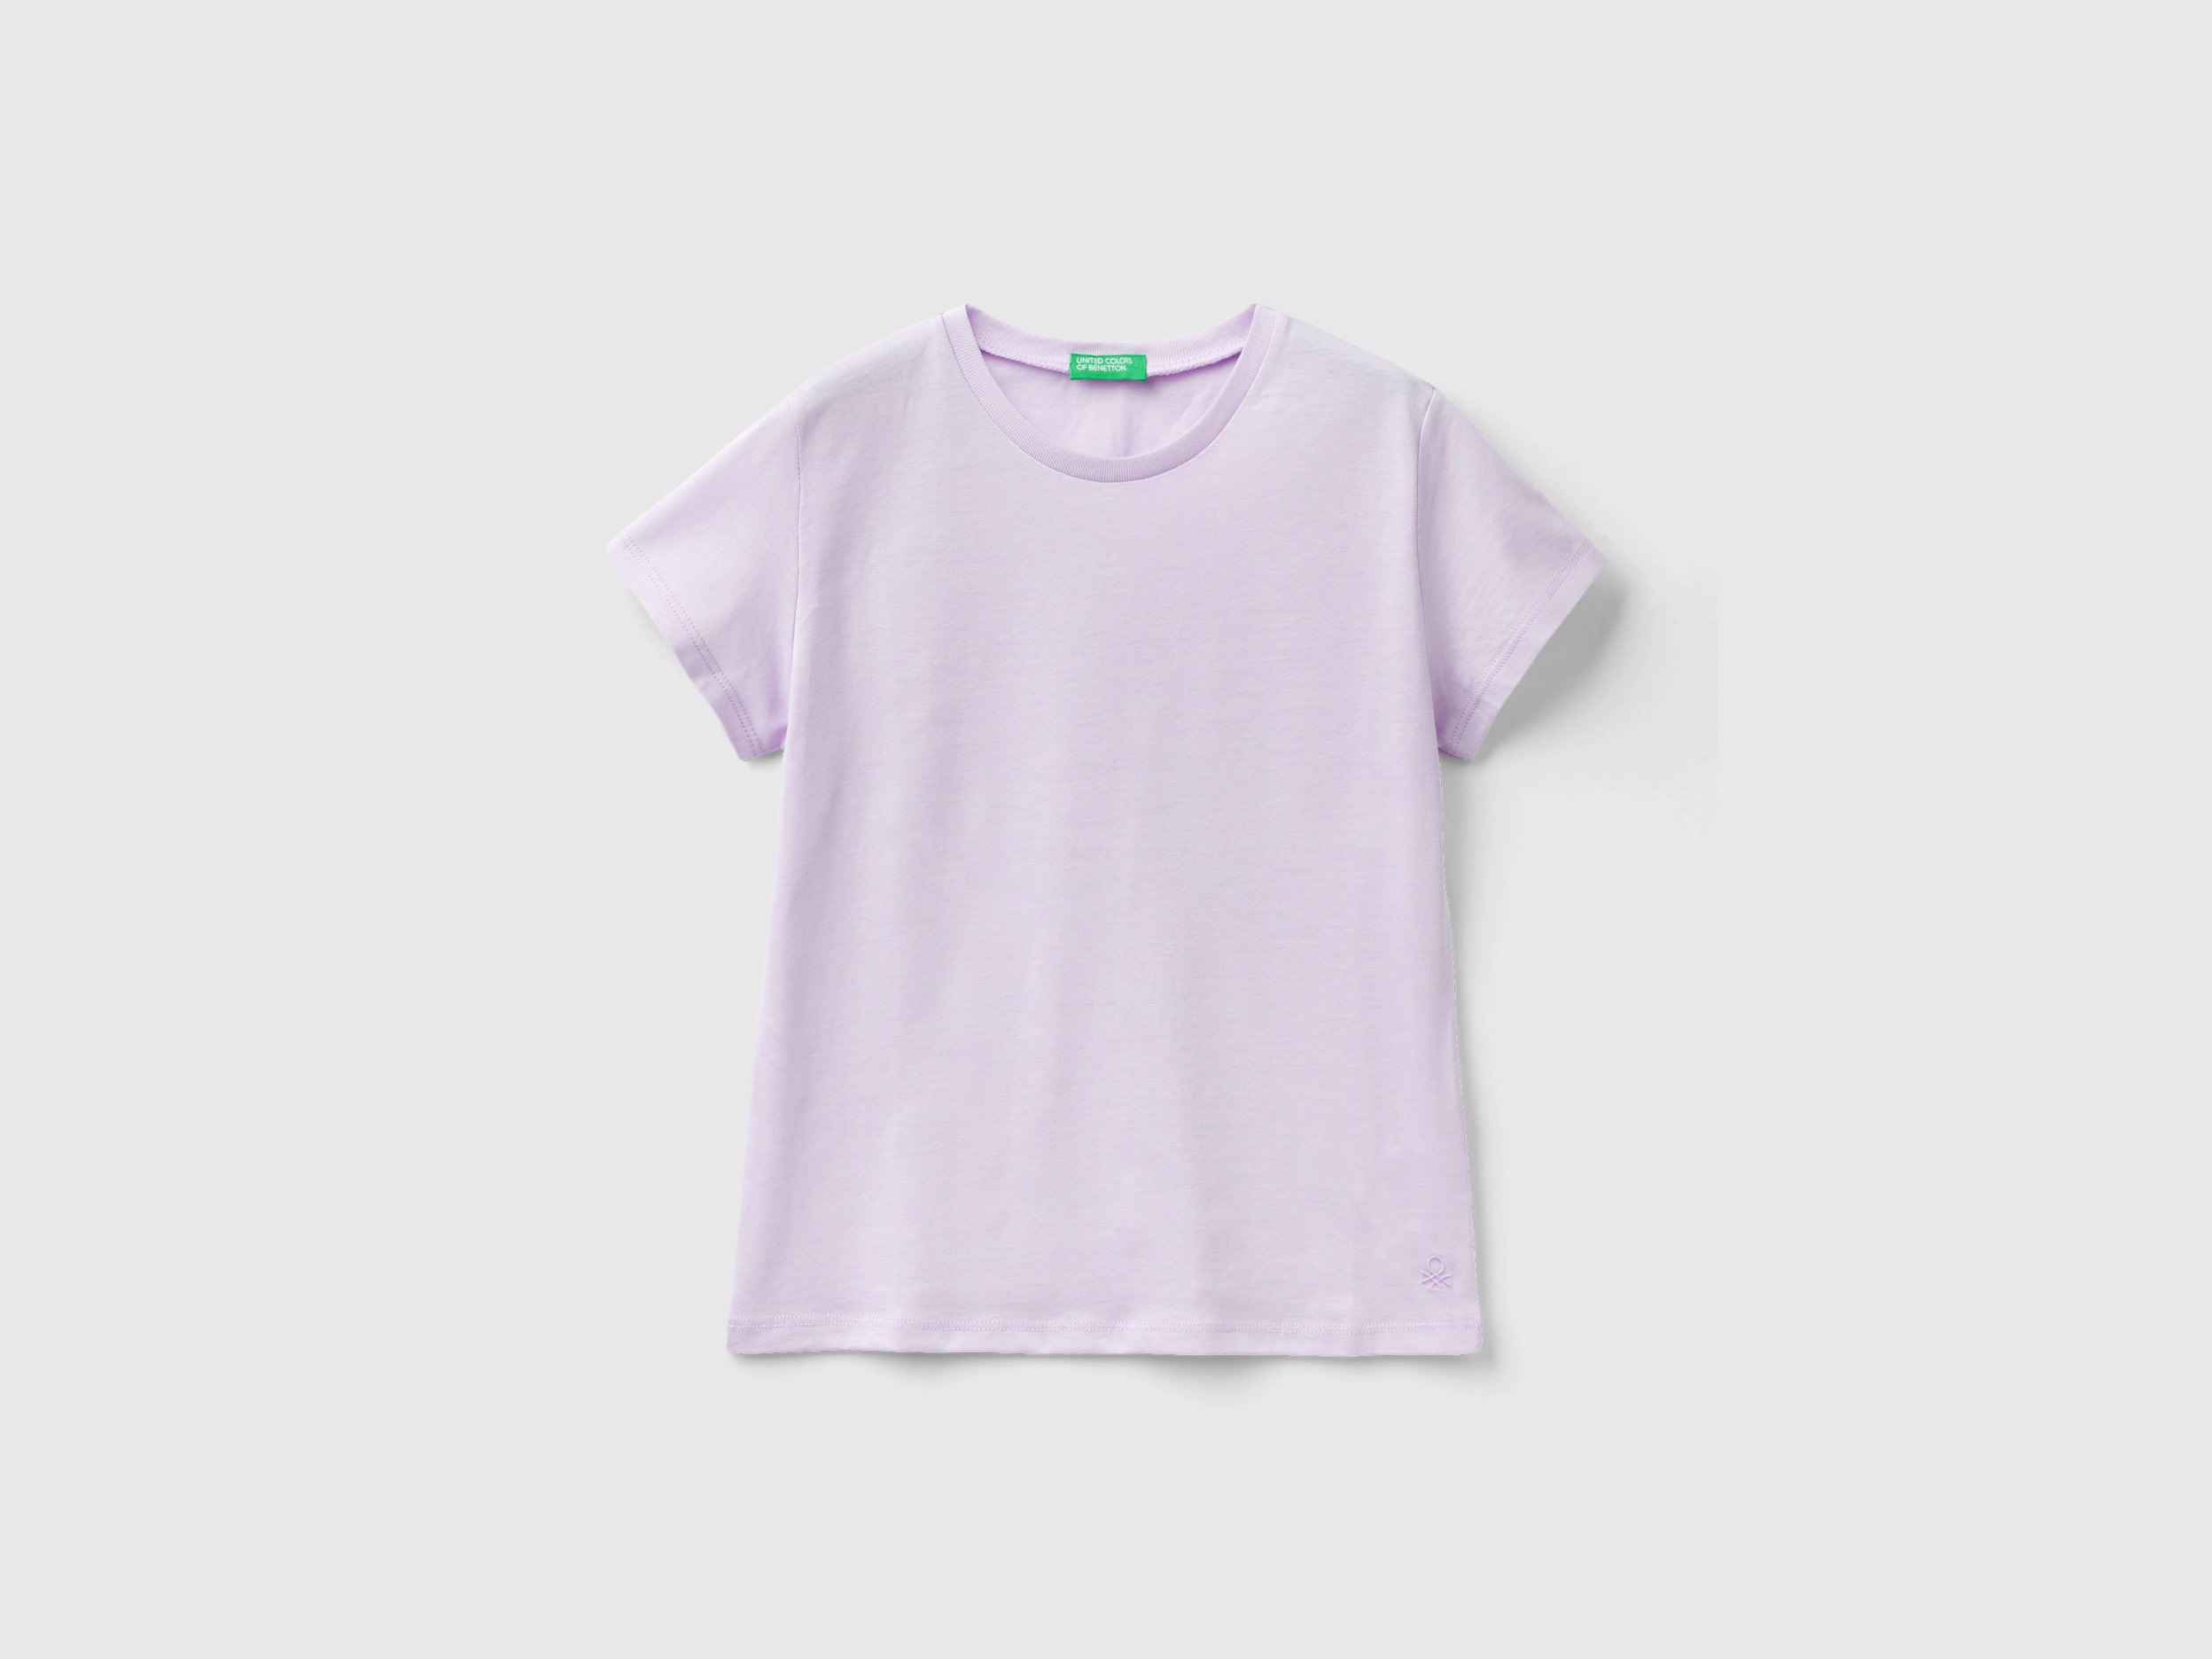 Image of Benetton, T-shirt In Pure Organic Cotton, size 2XL, Lilac, Kids